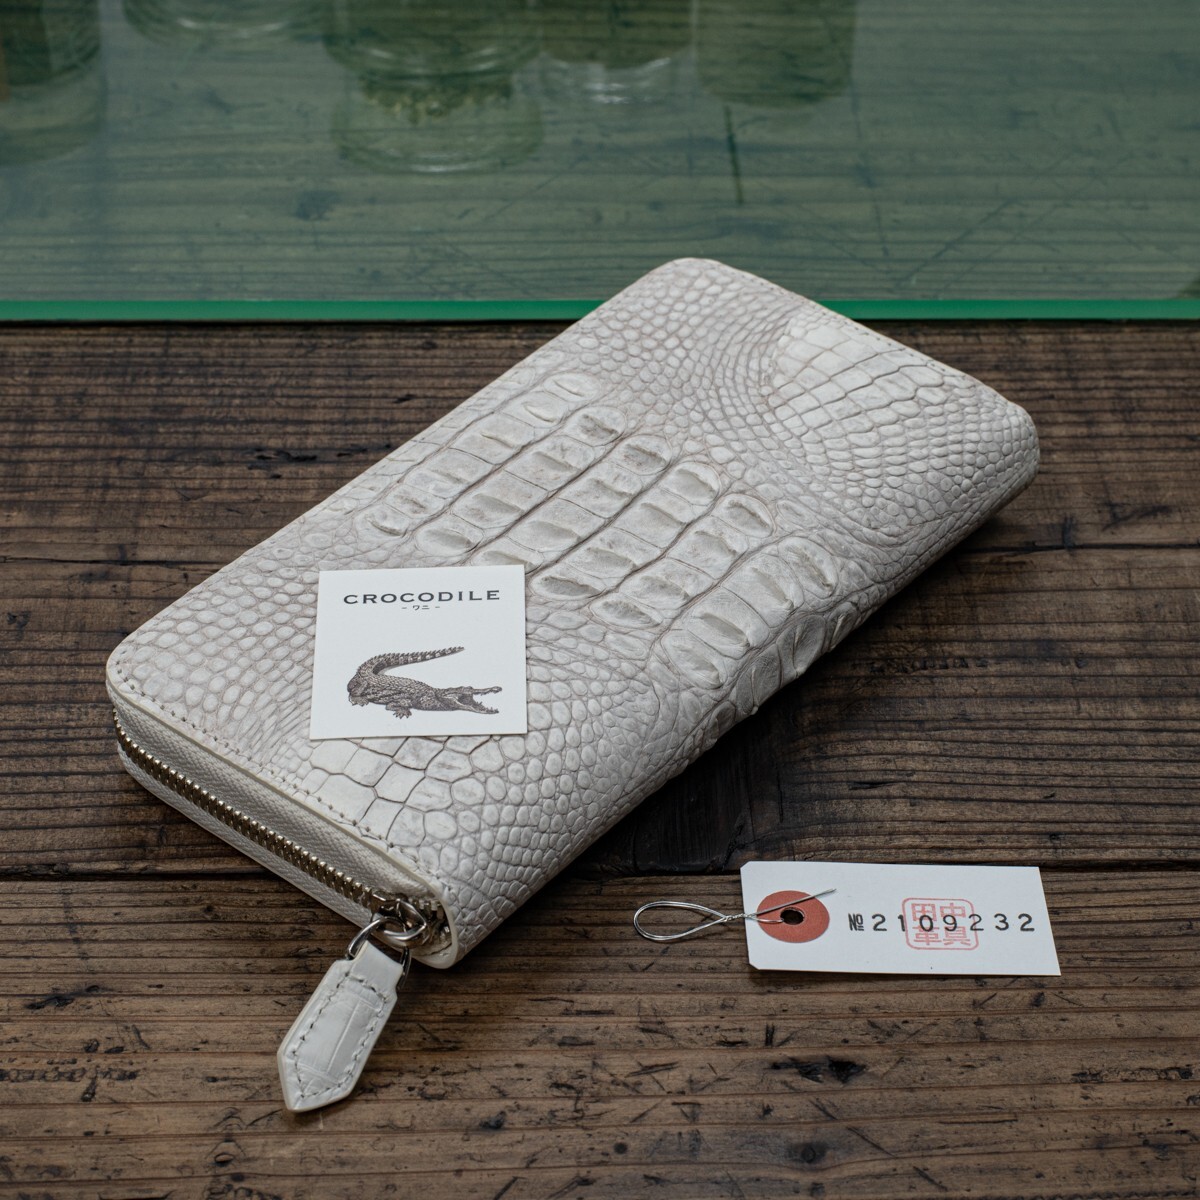 [ the truth thing photographing ] new goods one sheets leather crocodile men's long wallet round fastener unused free shipping 1 jpy .wanihimalaya white white rice field middle leather .